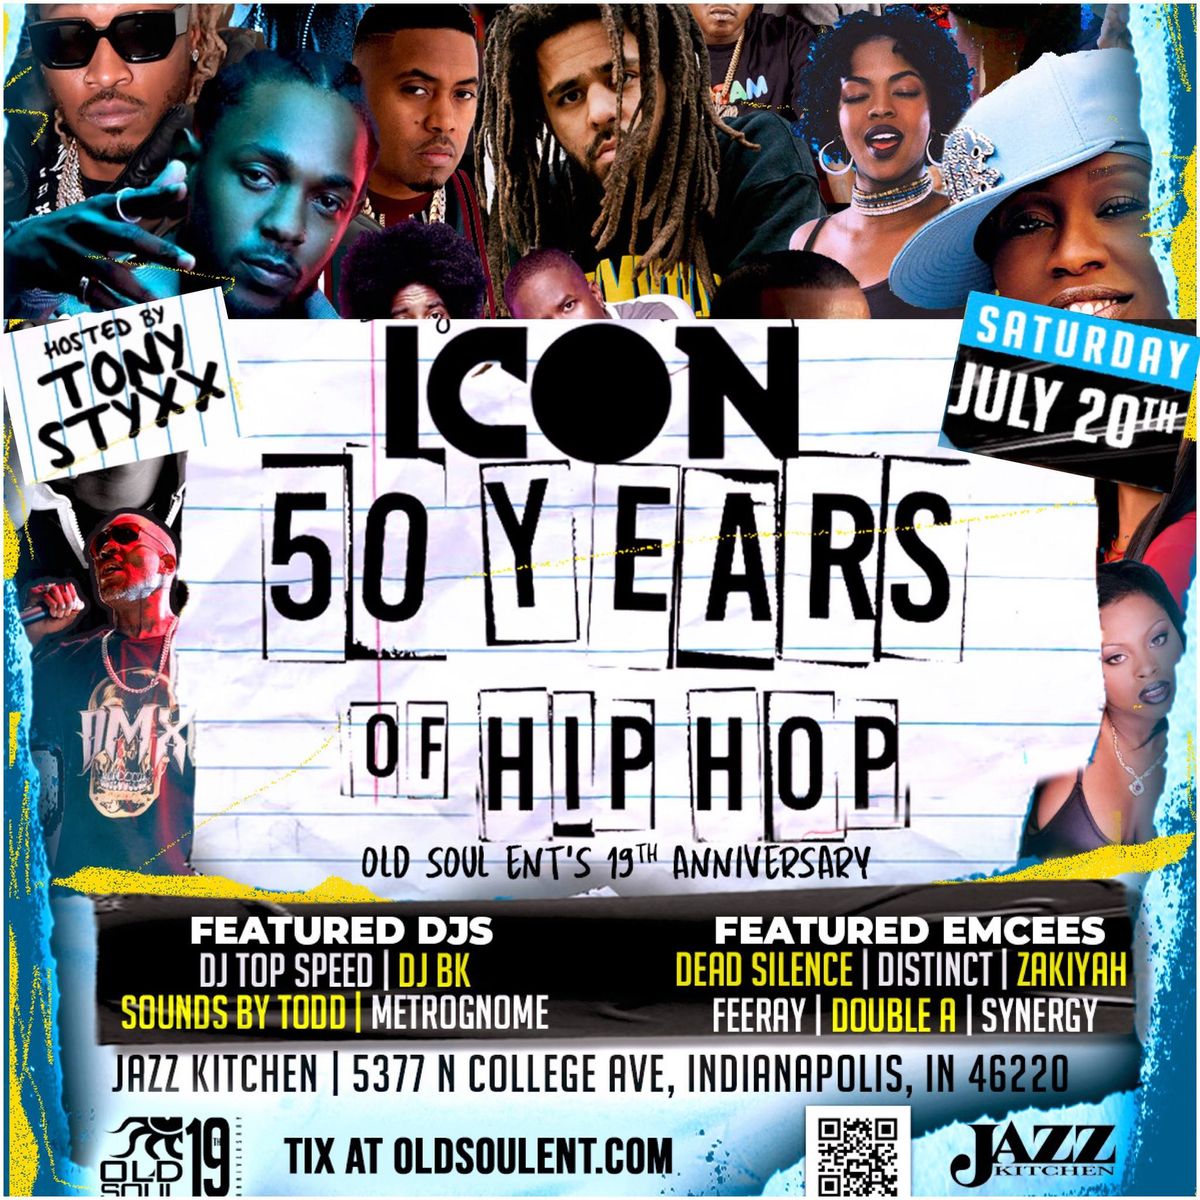 ICON Party: 50 Years of Hip-Hop at The Jazz Kitchen